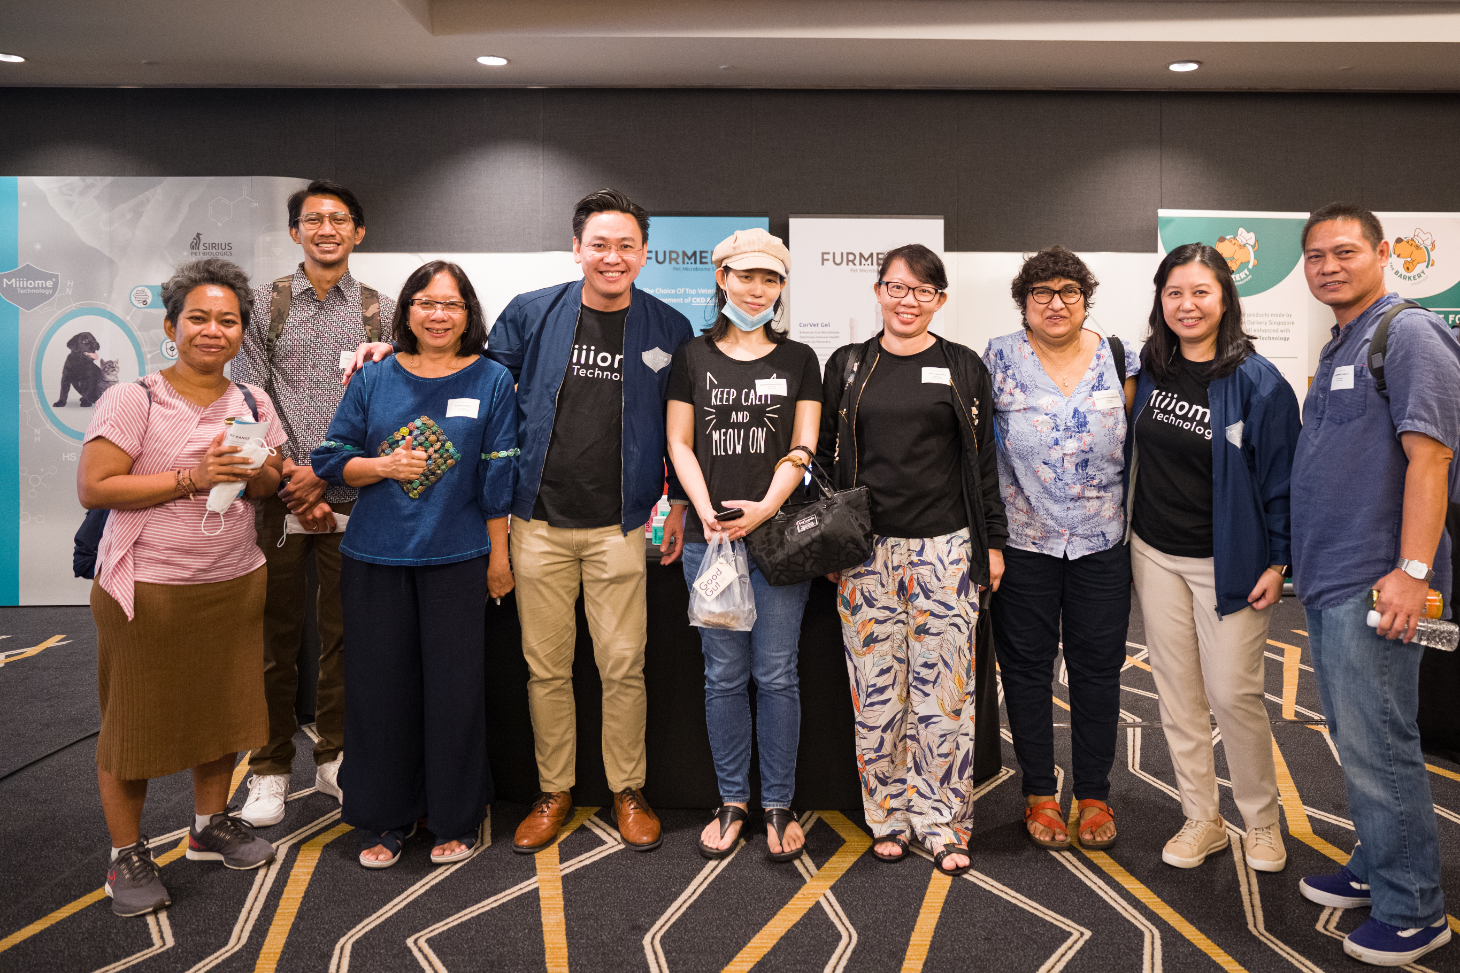 Our special thanks also go to our veterinary partners from Singapore and Indonesia who had kindly shared renal markers data of their clinical cases, and other partners from our pet ecosystems who made the Miiiome Tradeshow eventful.